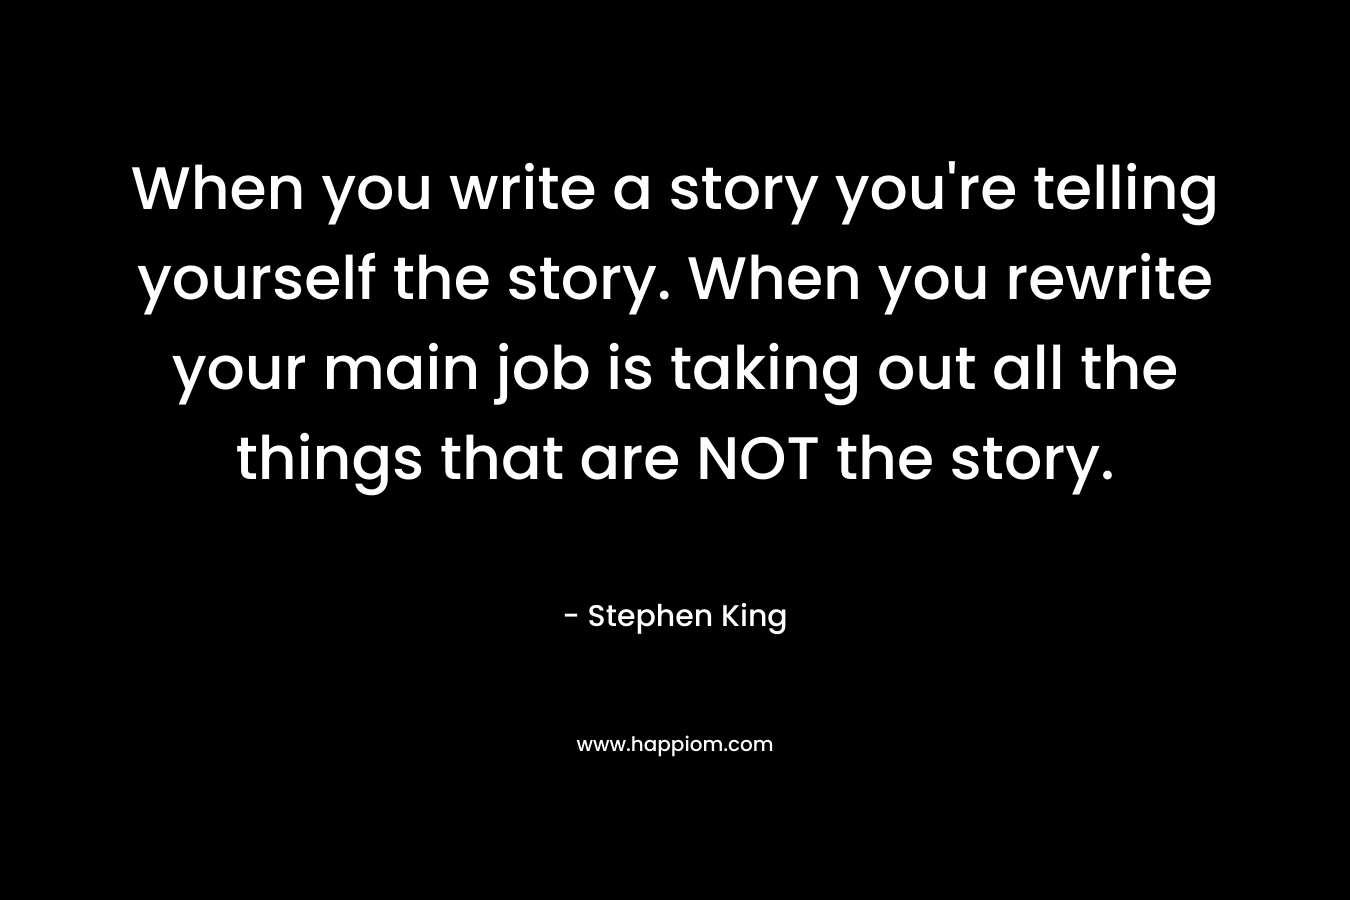 When you write a story you're telling yourself the story. When you rewrite your main job is taking out all the things that are NOT the story.